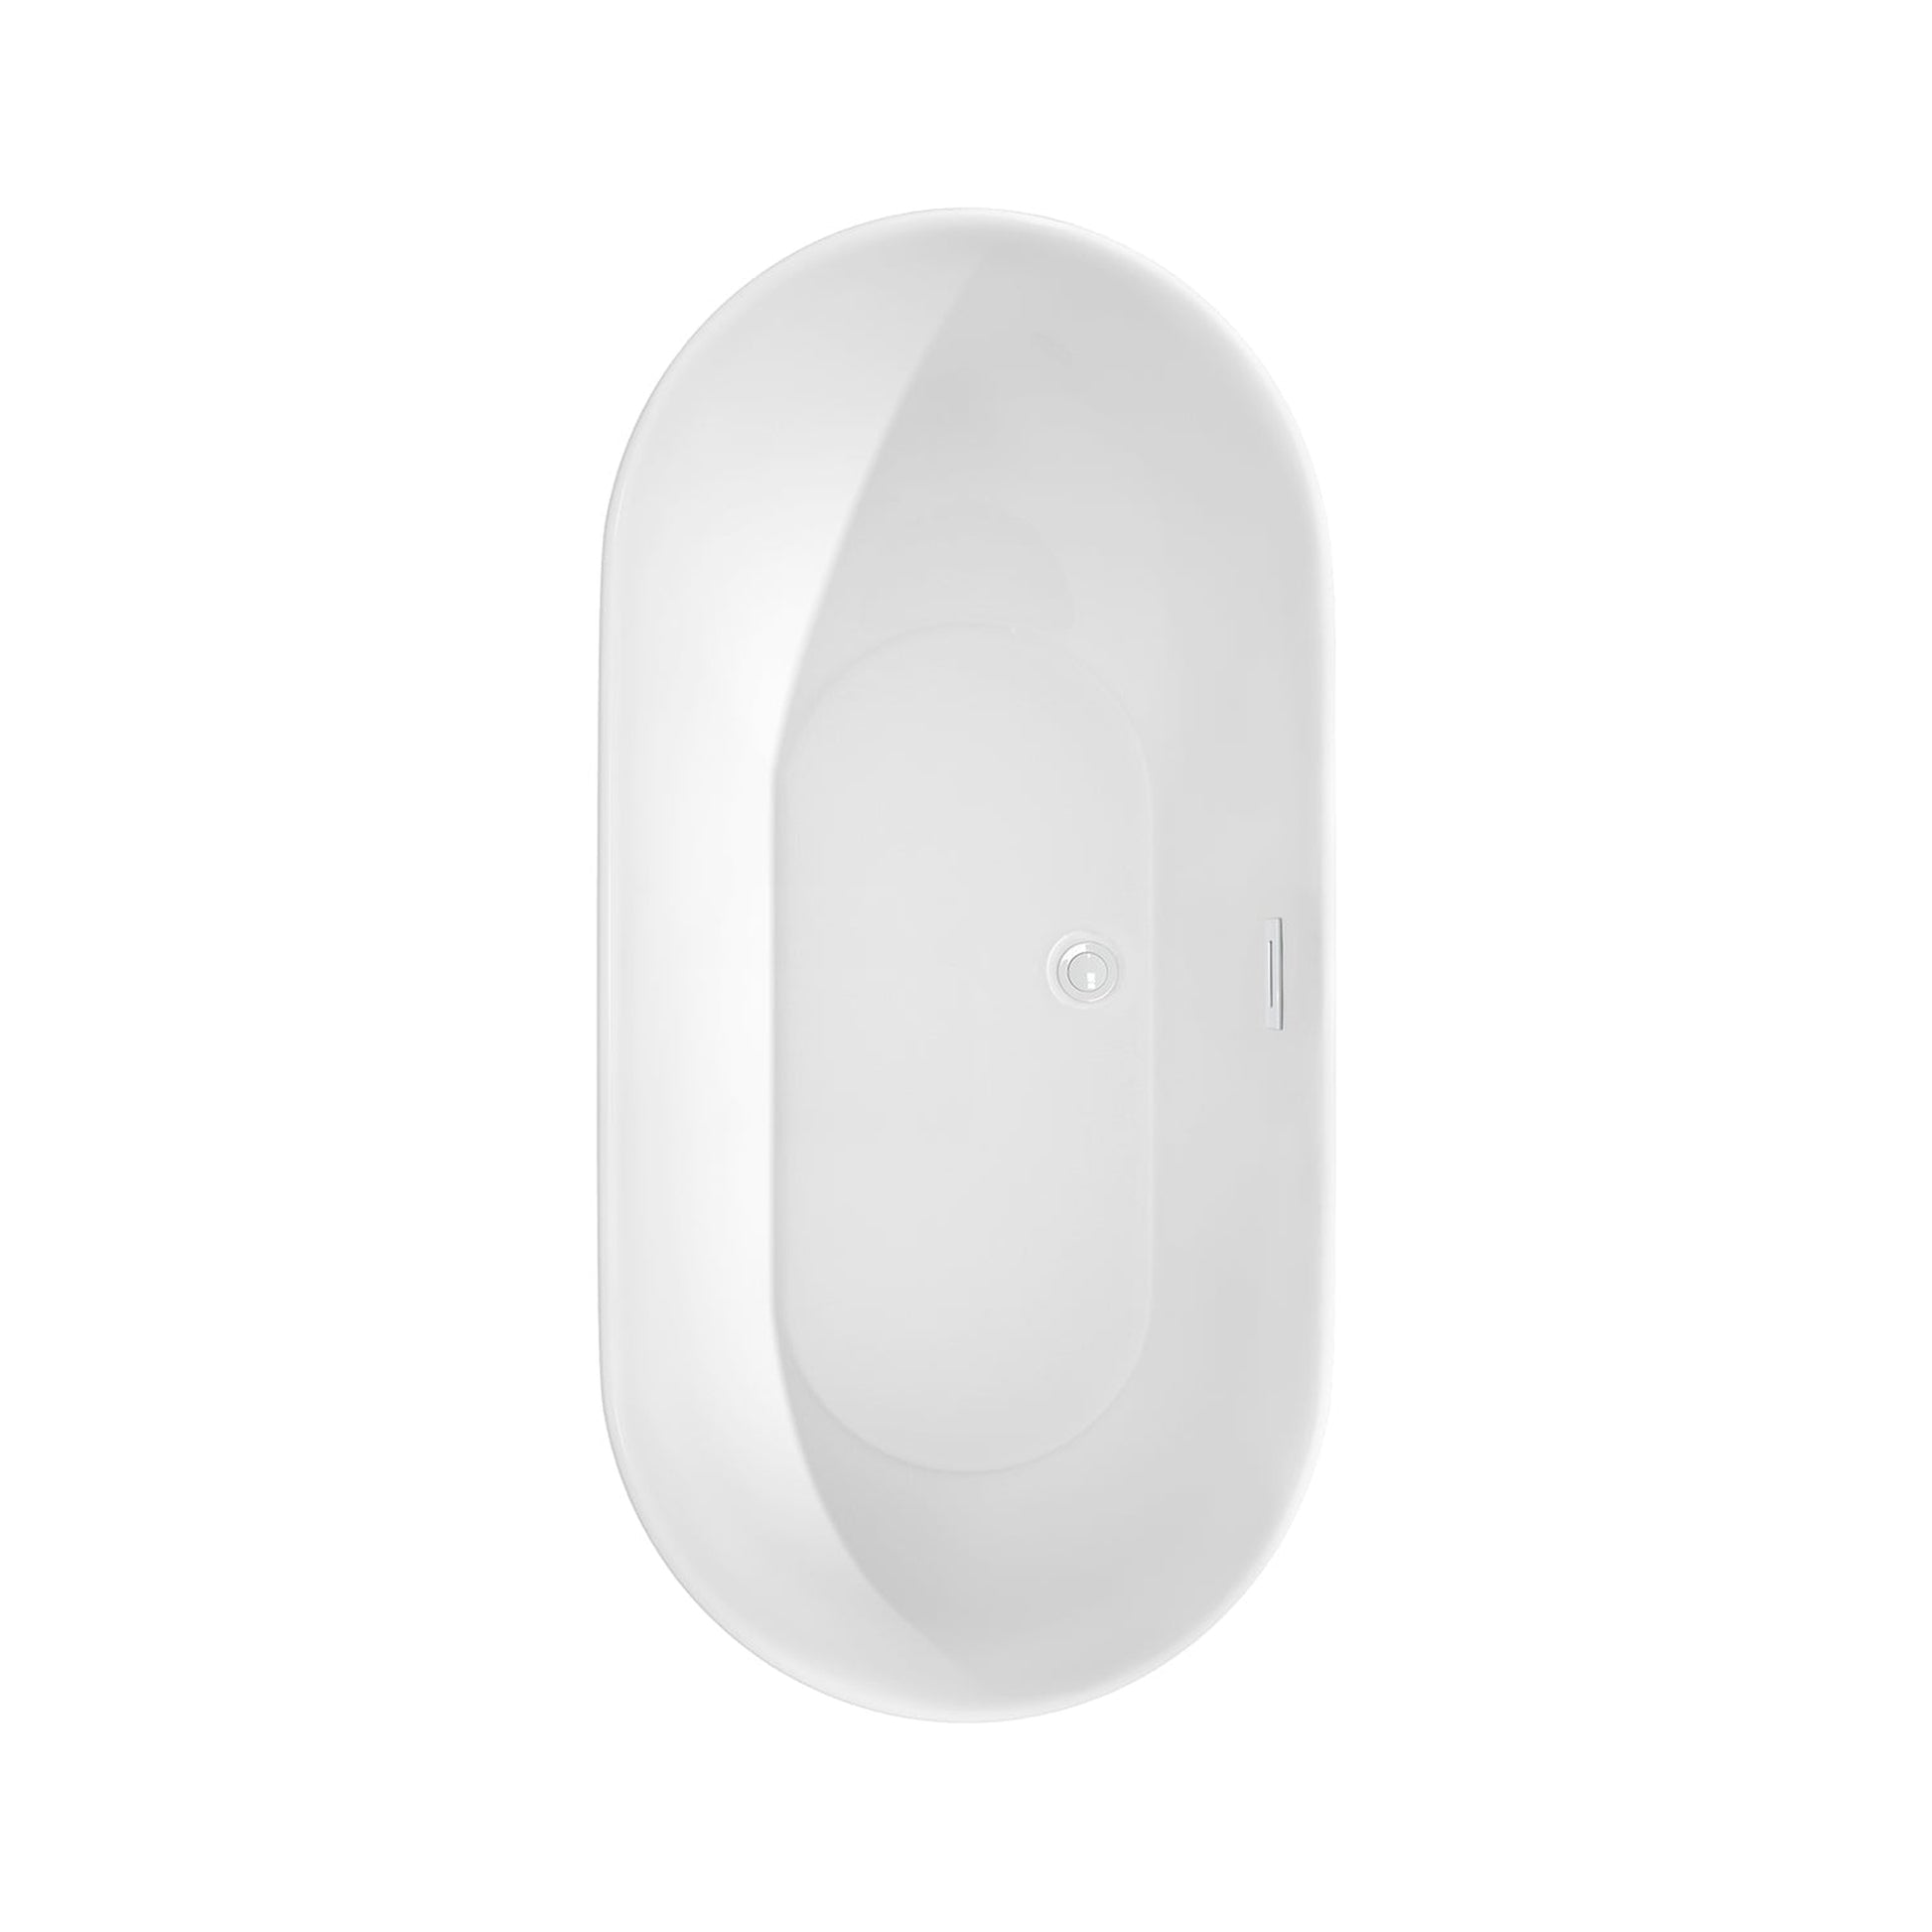 Wyndham Collection Melissa 60" Freestanding Bathtub in White With Shiny White Drain and Overflow Trim